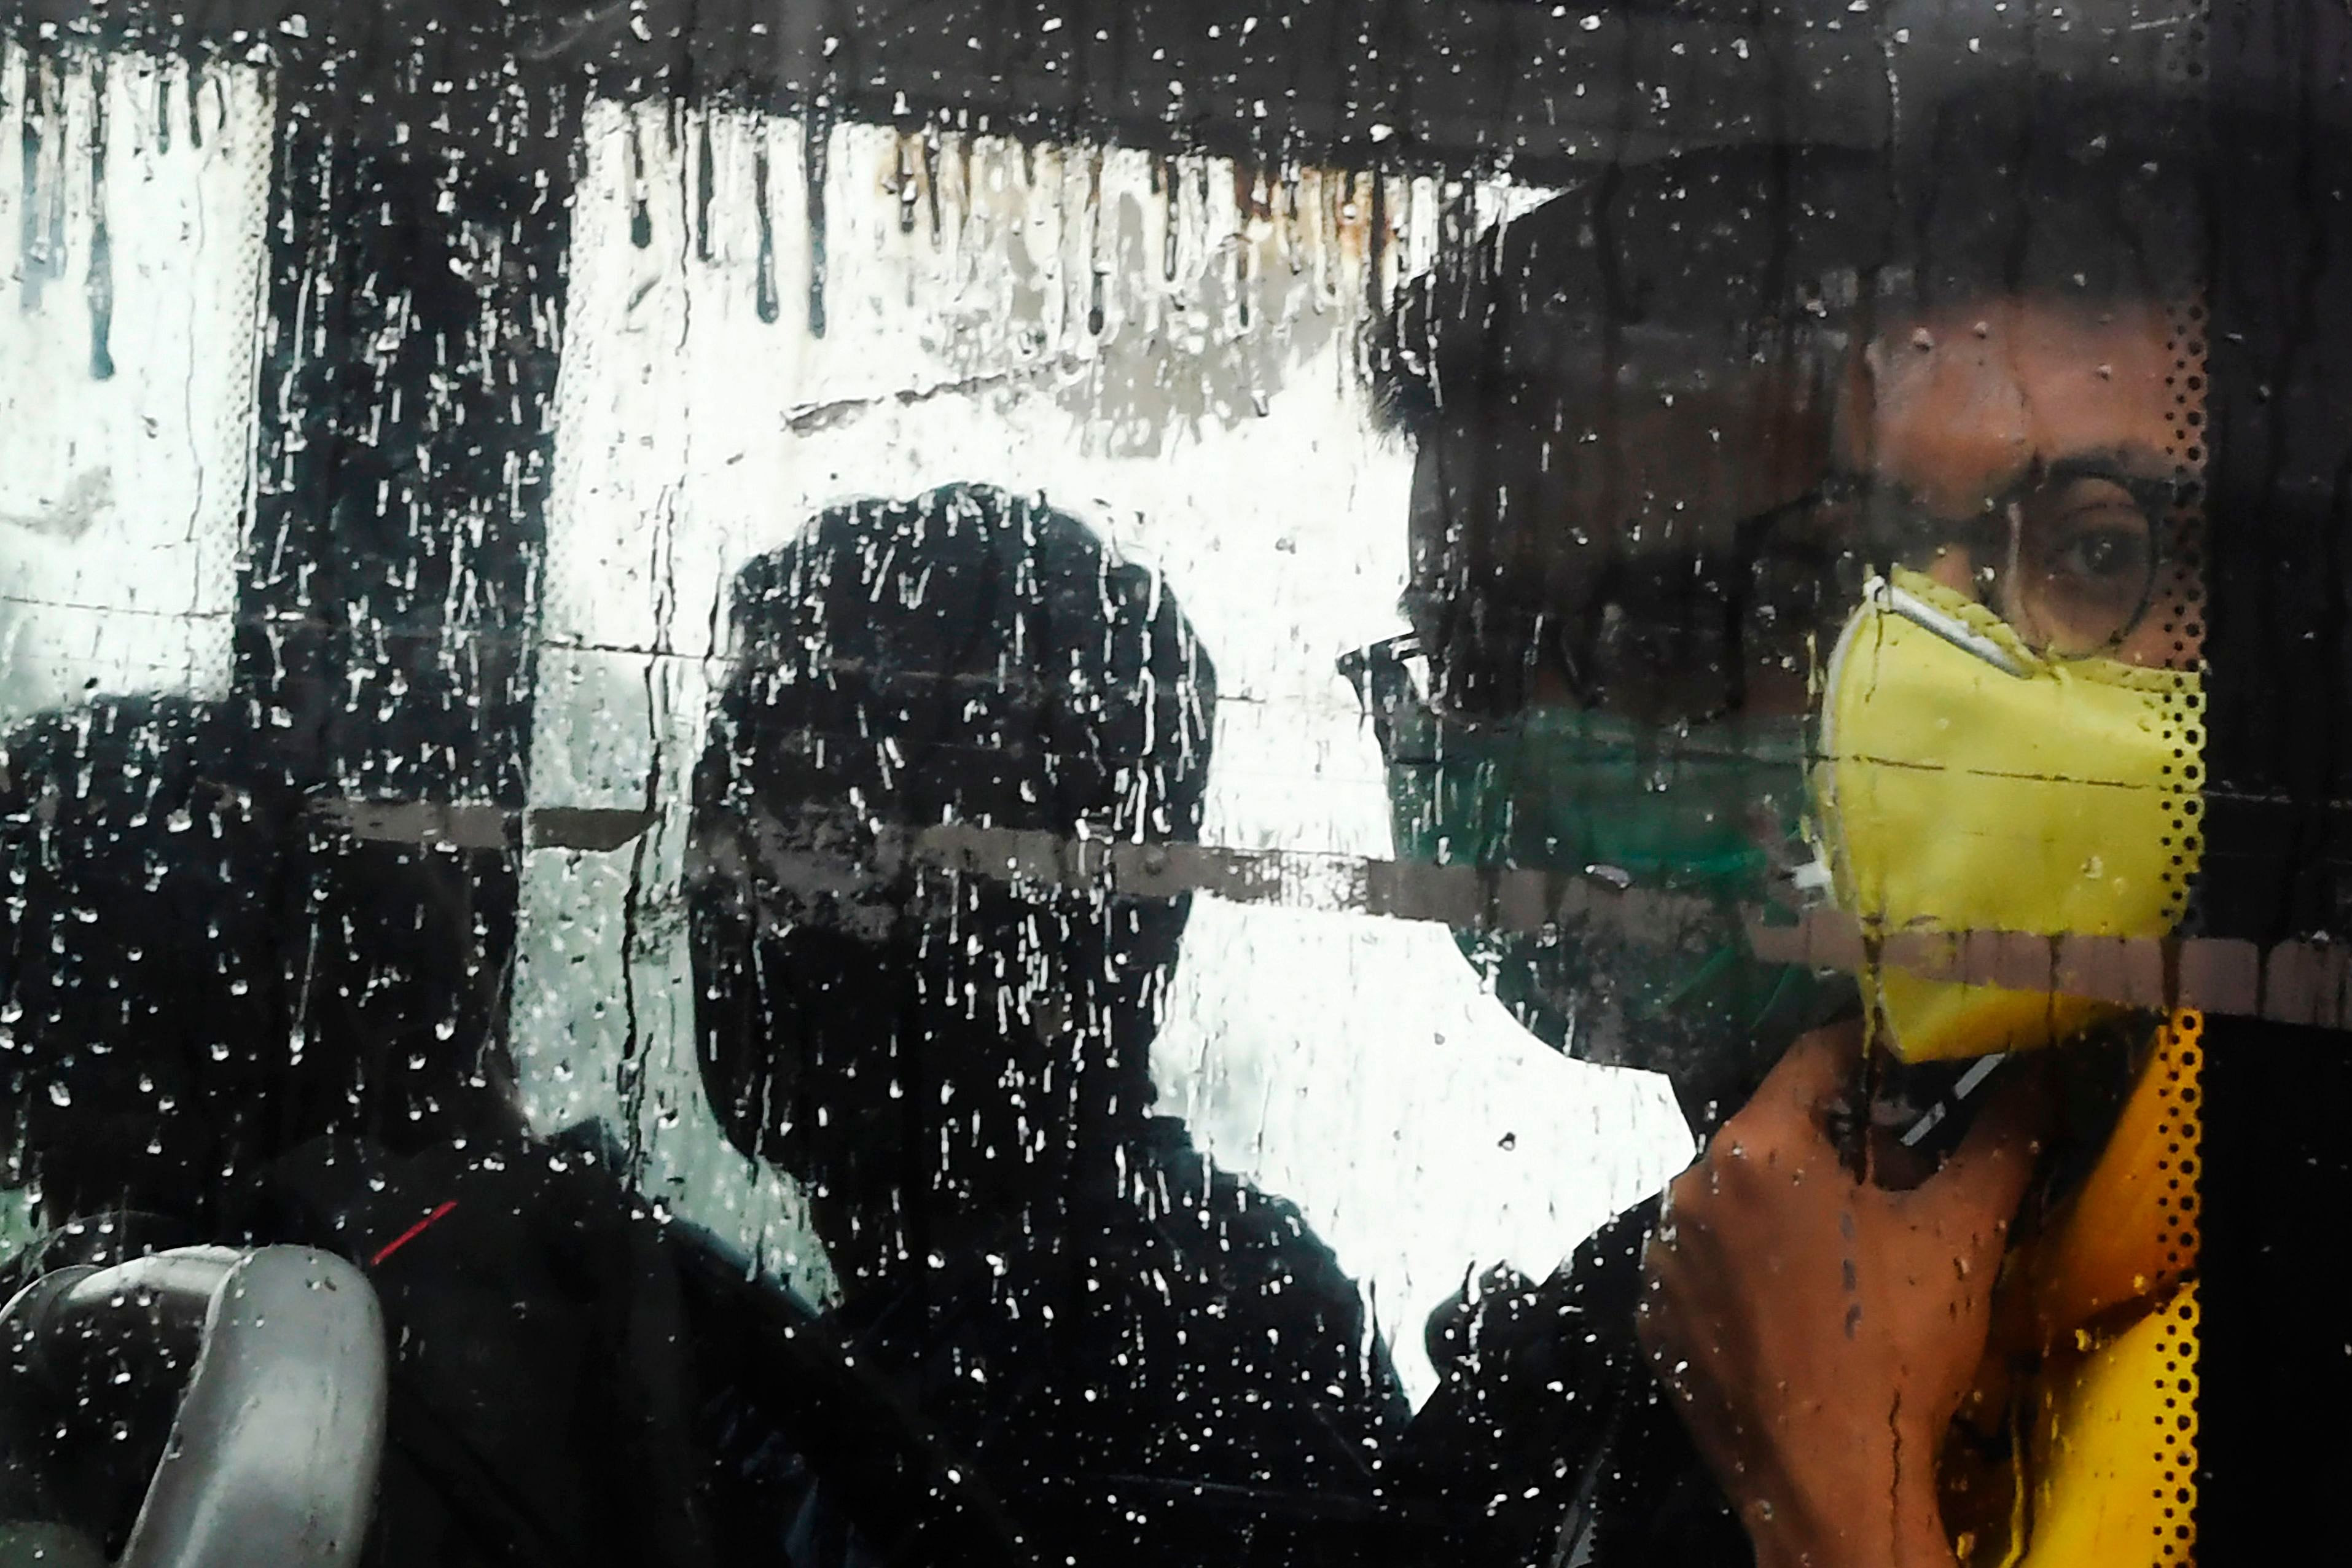 People are seen with masks in Kolkata. (Credit: AFP)